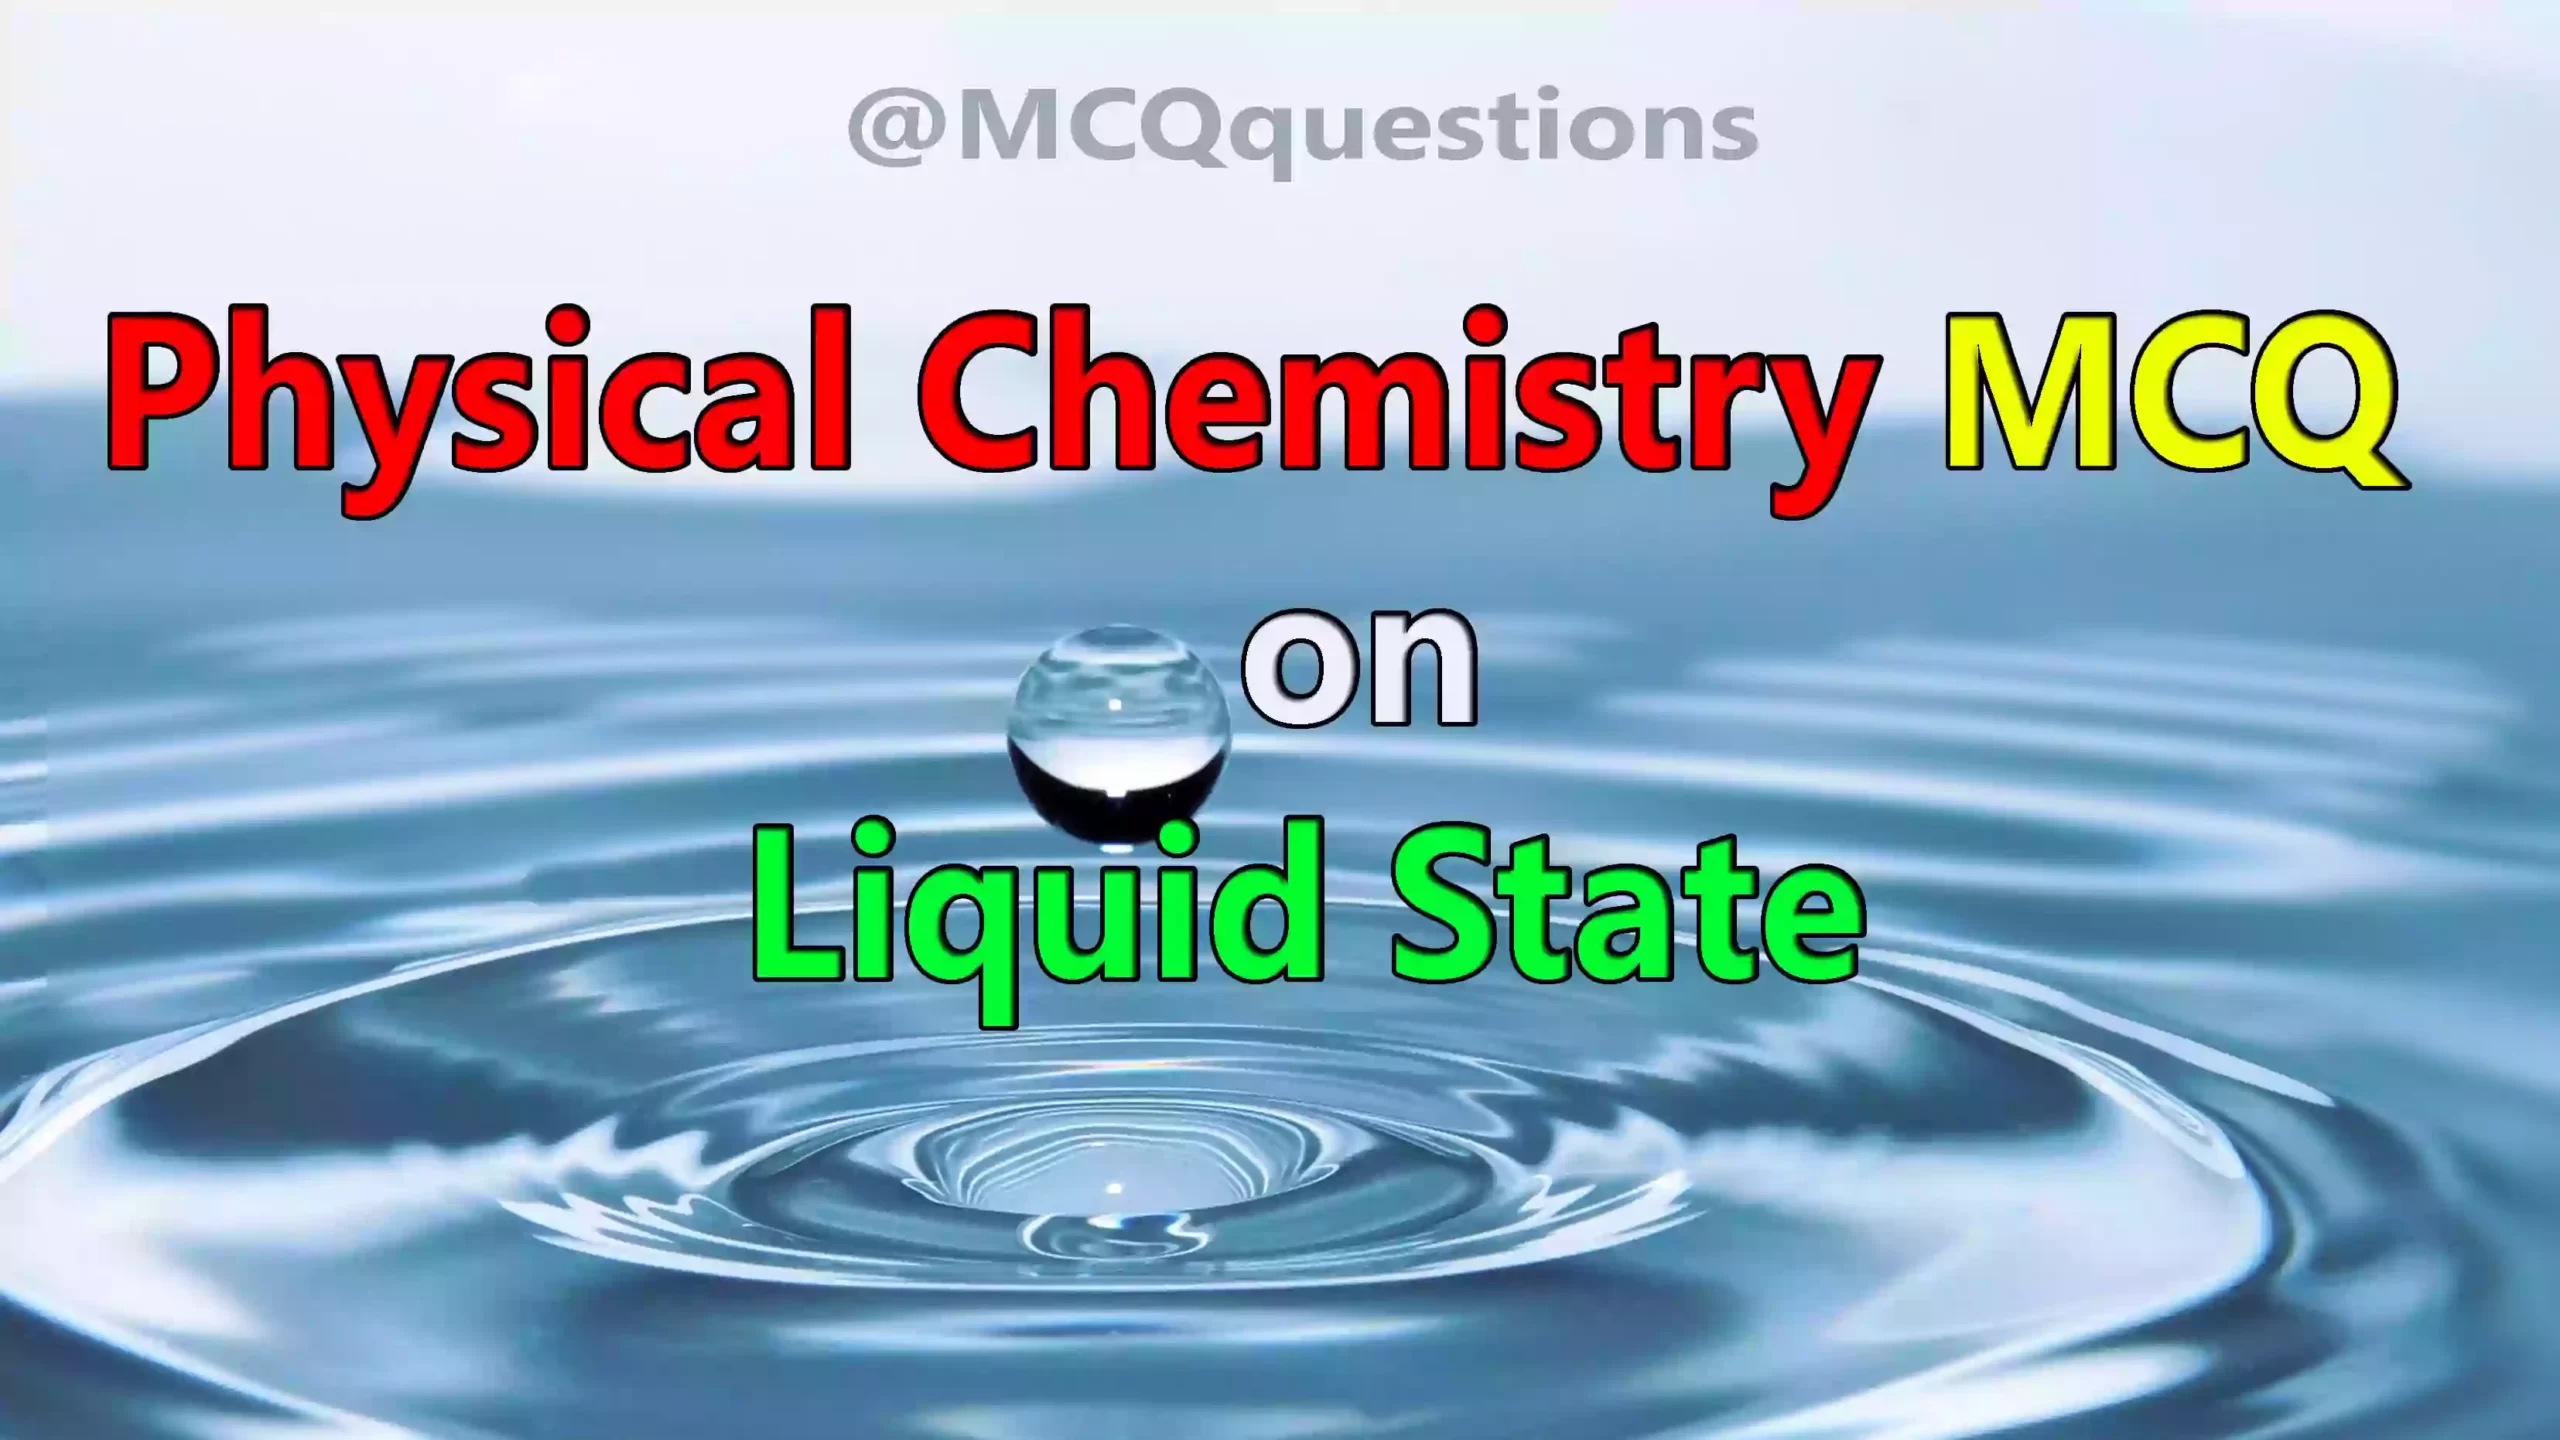 Physical Chemistry MCQ on Liquid State